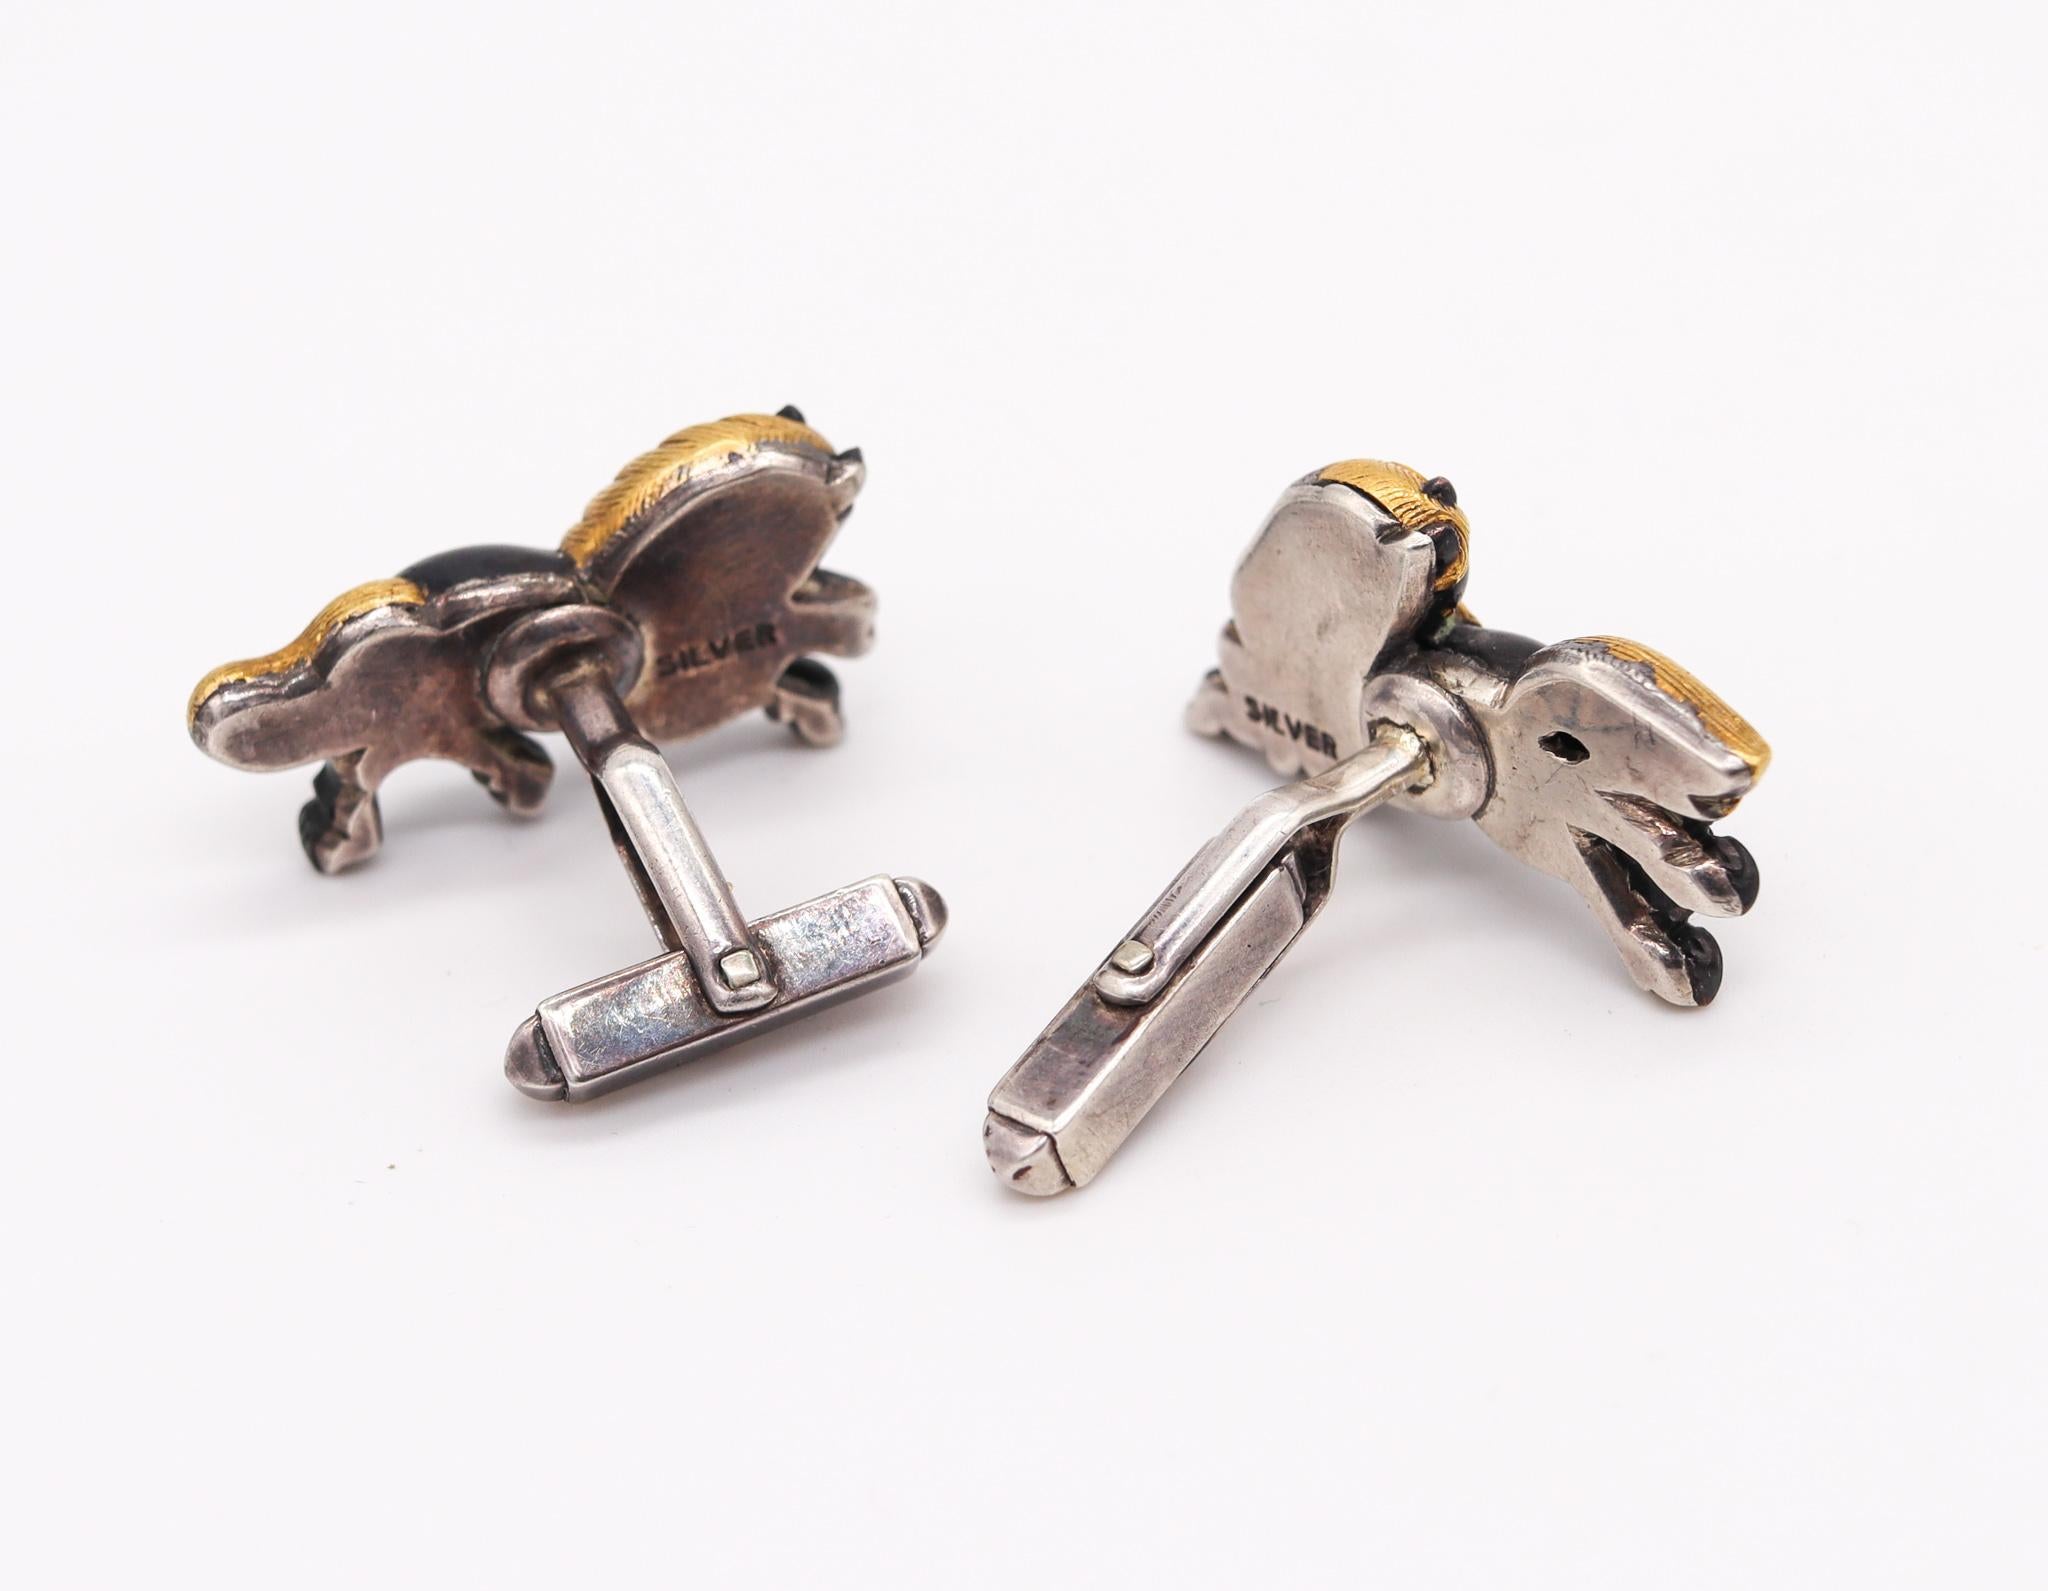 Germany 1970 Menuki Cufflinks Japanese Shakudo Sterling Silver 24Kt And Bronze In Excellent Condition For Sale In Miami, FL